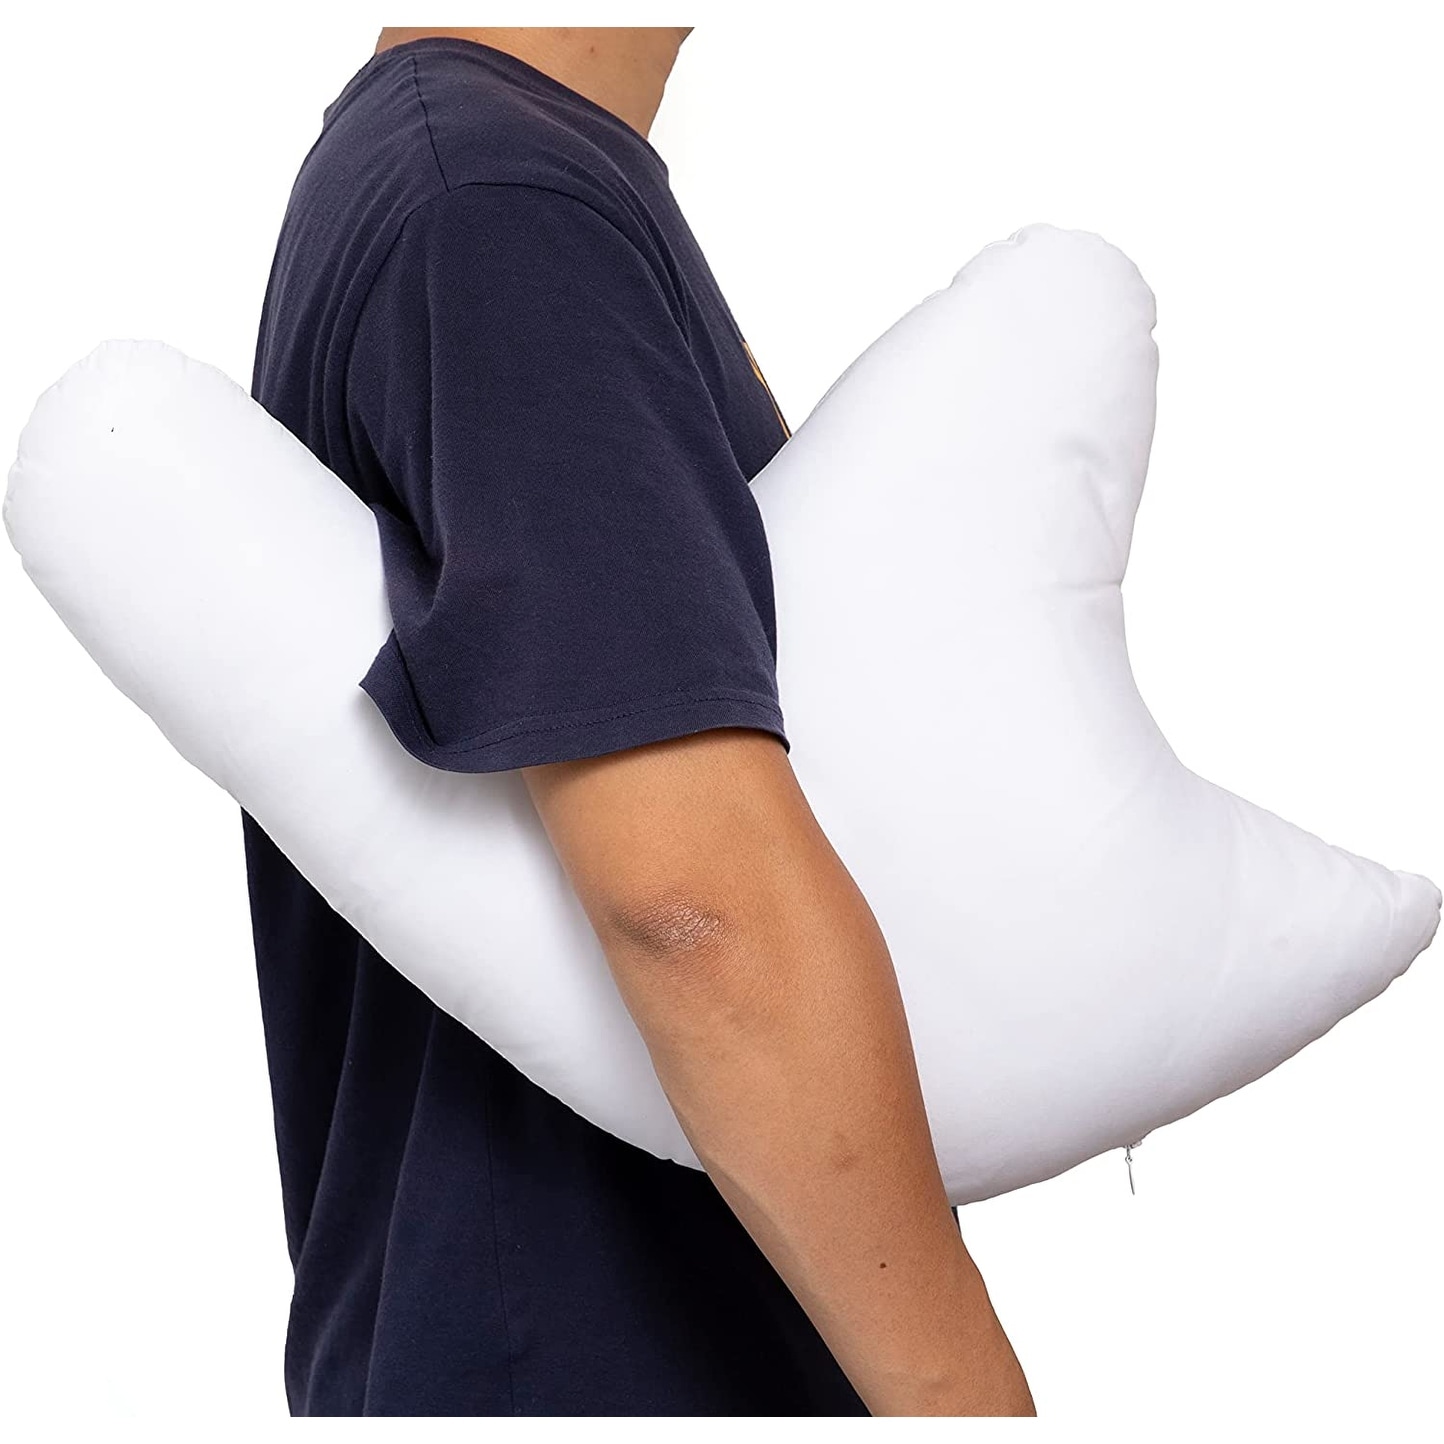 https://ak1.ostkcdn.com/images/products/is/images/direct/56d3d217c15e19c4c8de92bff7390f6dacd5d98f/Cheer-Collection-W-Shaped-Shoulder-Surgery-Recovery-Pillow-Filled-with-Shredded-Memory-Foam.jpg